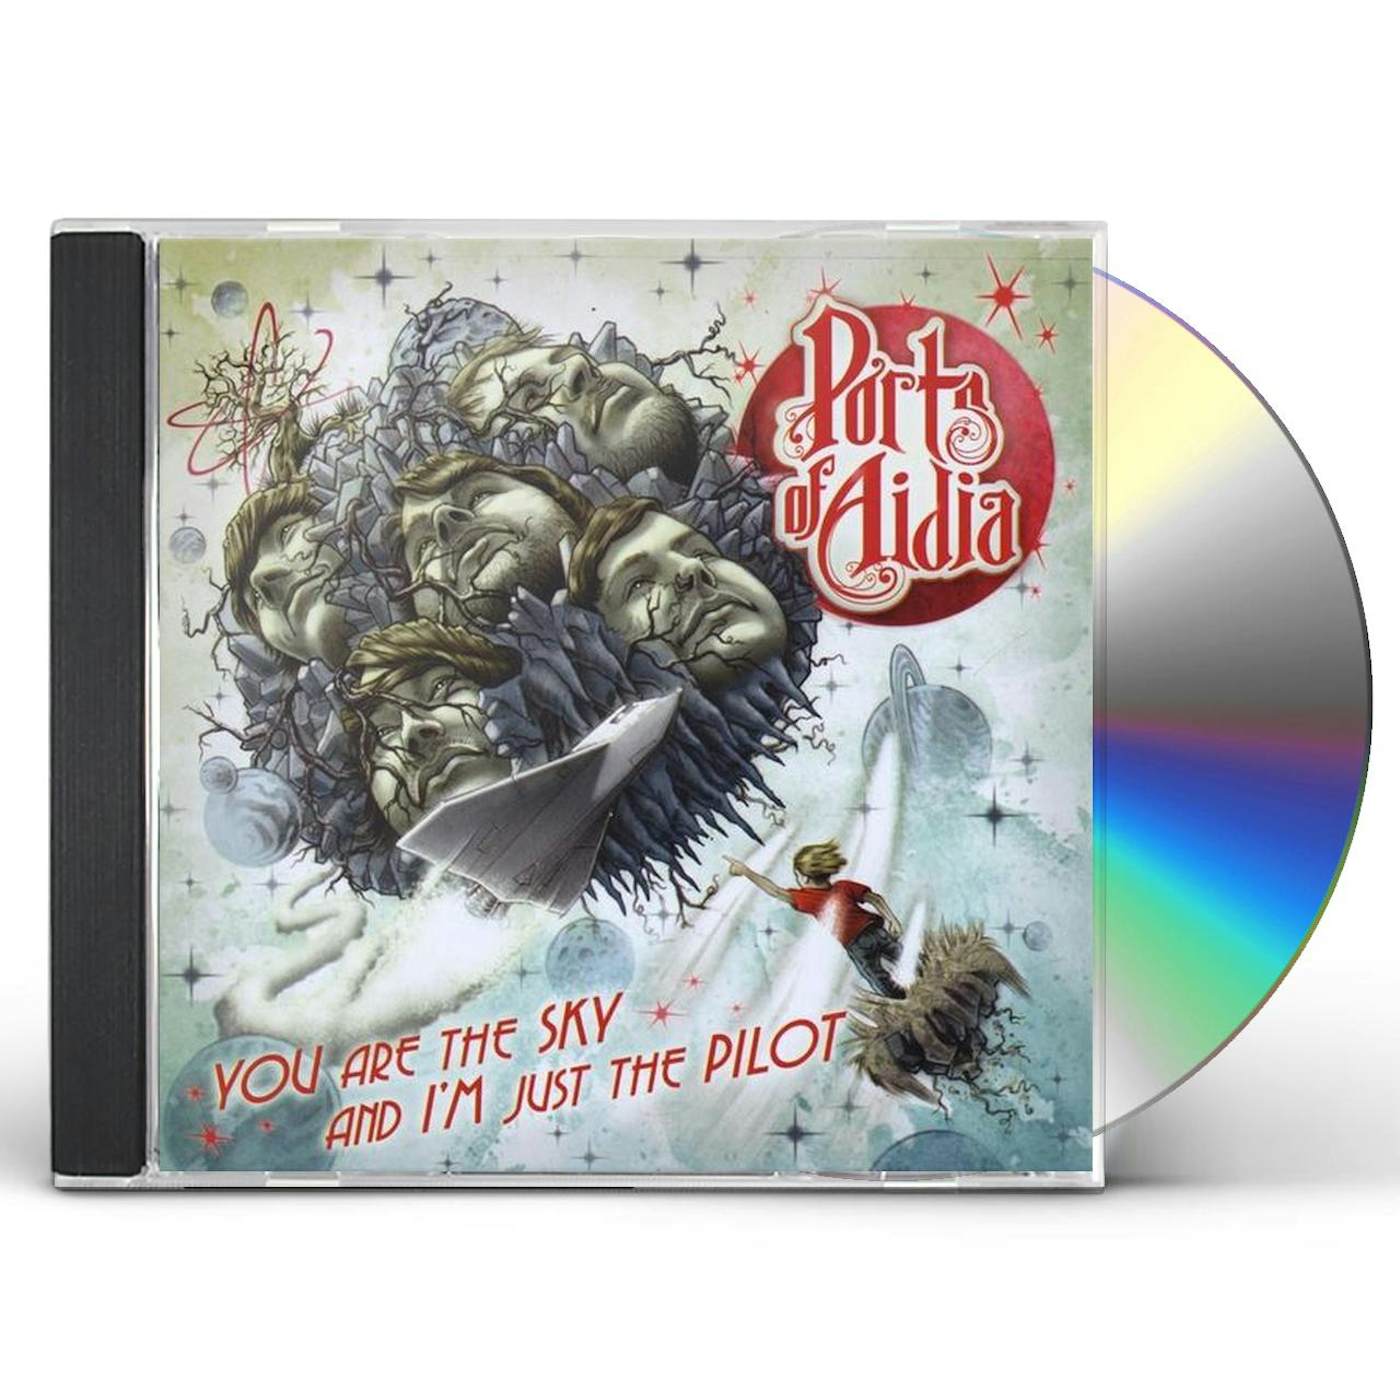 Ports Of Aidia YOU ARE THE SKY & I'M JUST THE PILOT CD